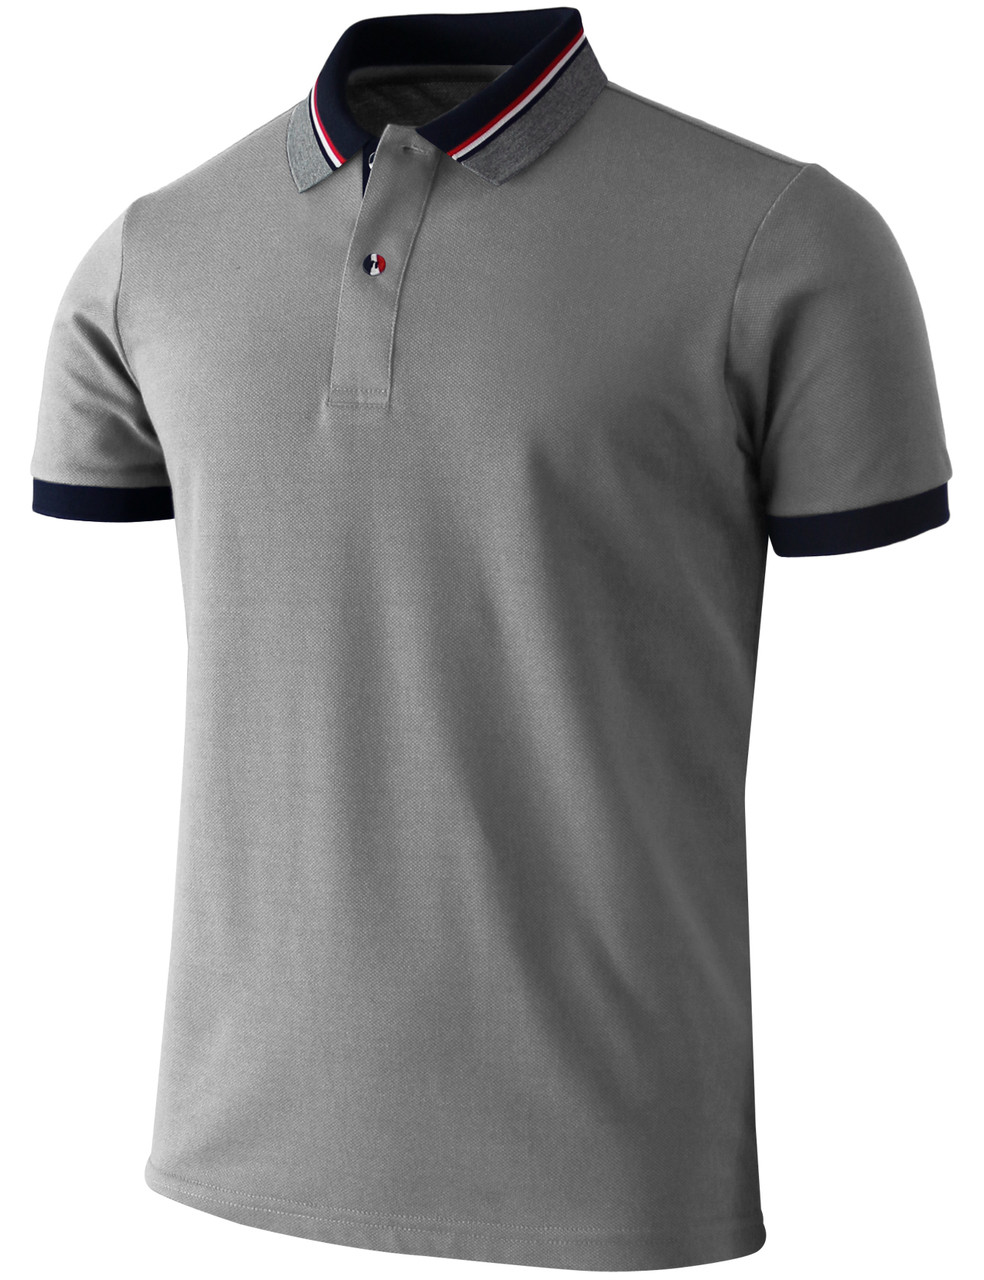 BCPOLO Solid Polo Shirt Short Sleeve Sportswear-5 colors-Unisex